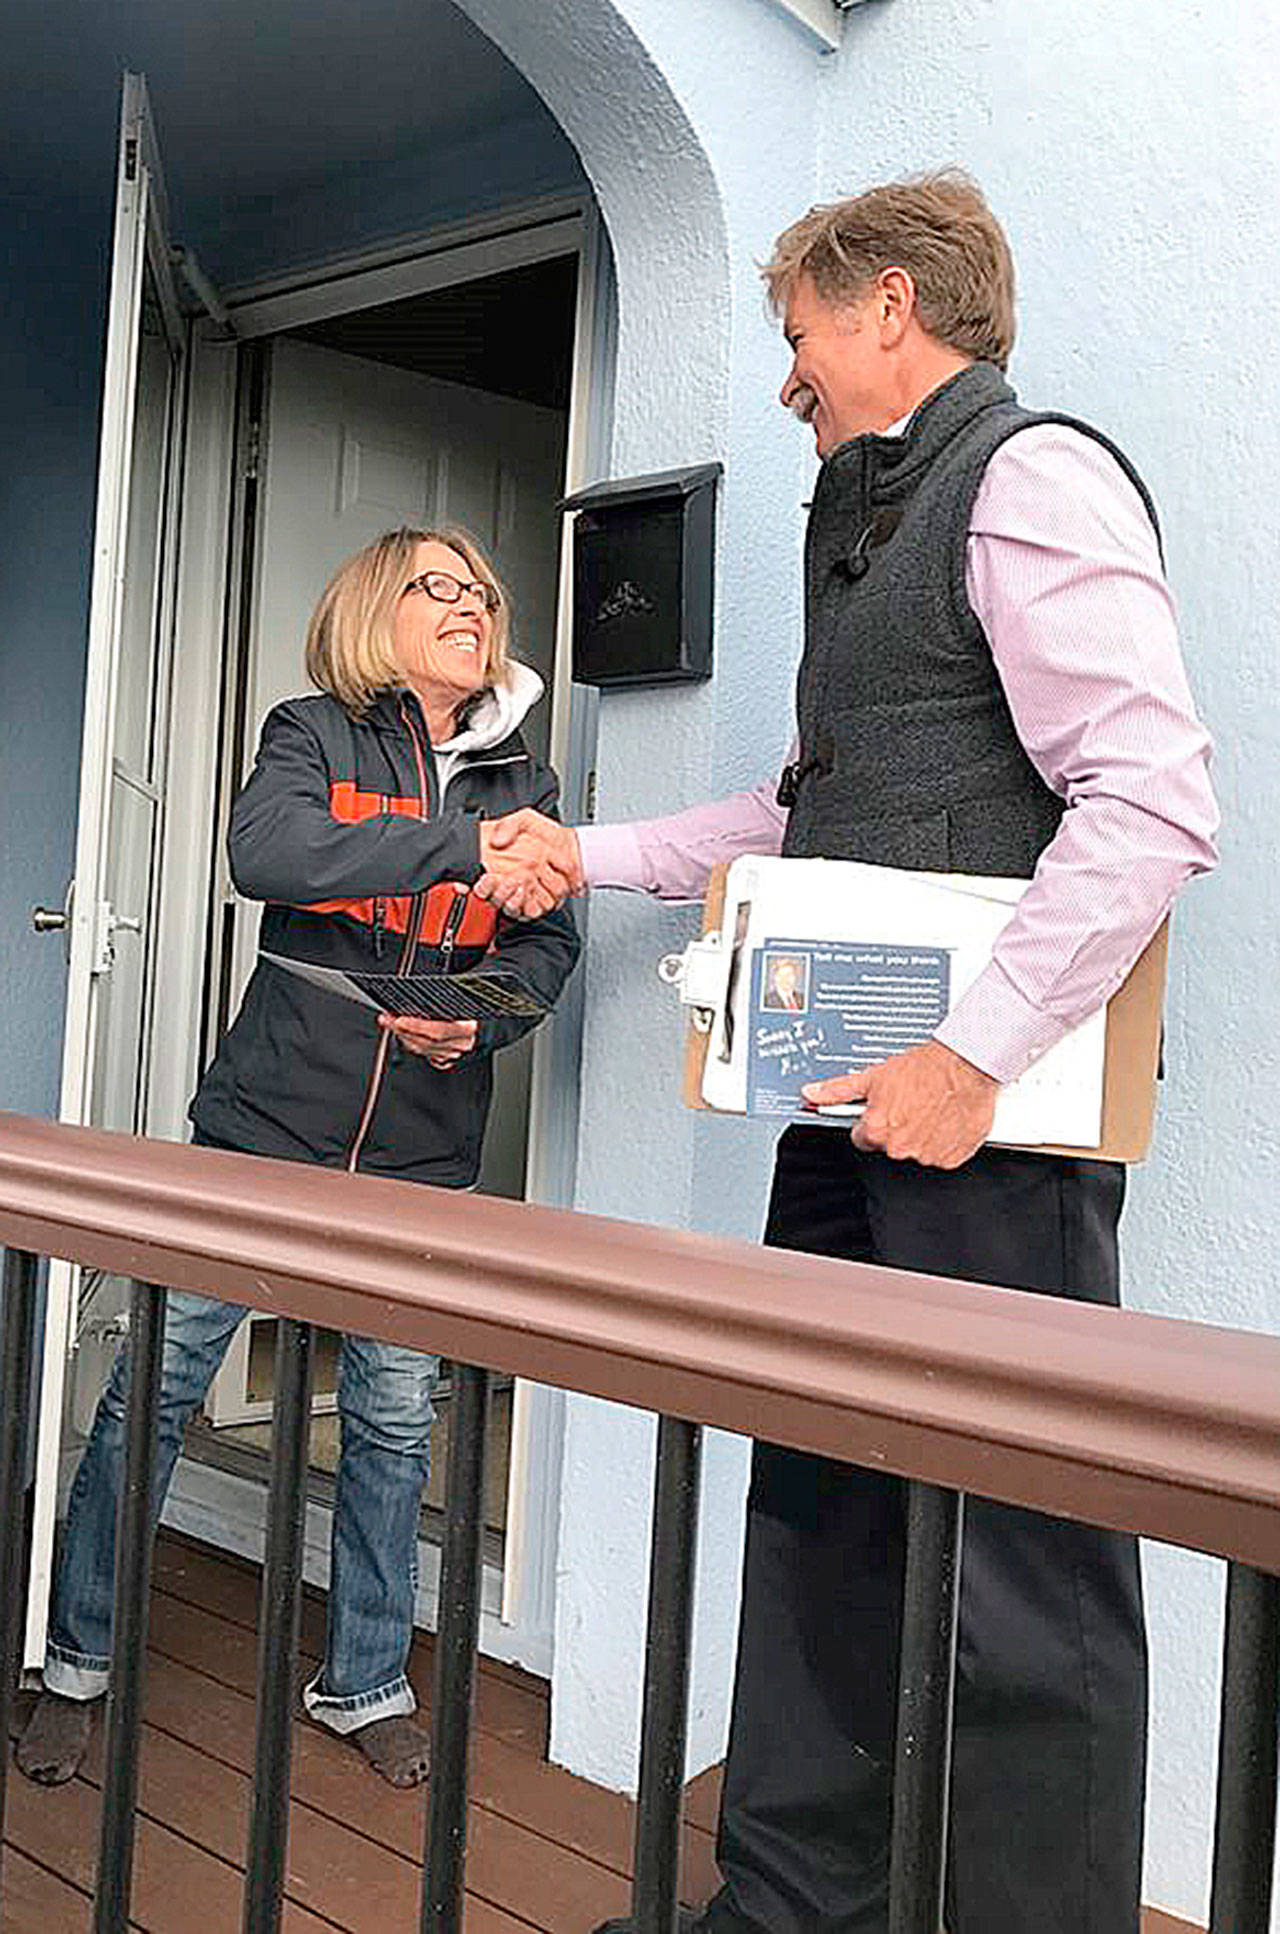 City councilman Greg Wheeler greets a constituent during his campaign for Bremerton mayor. (Photo: Wheeler campaign website)